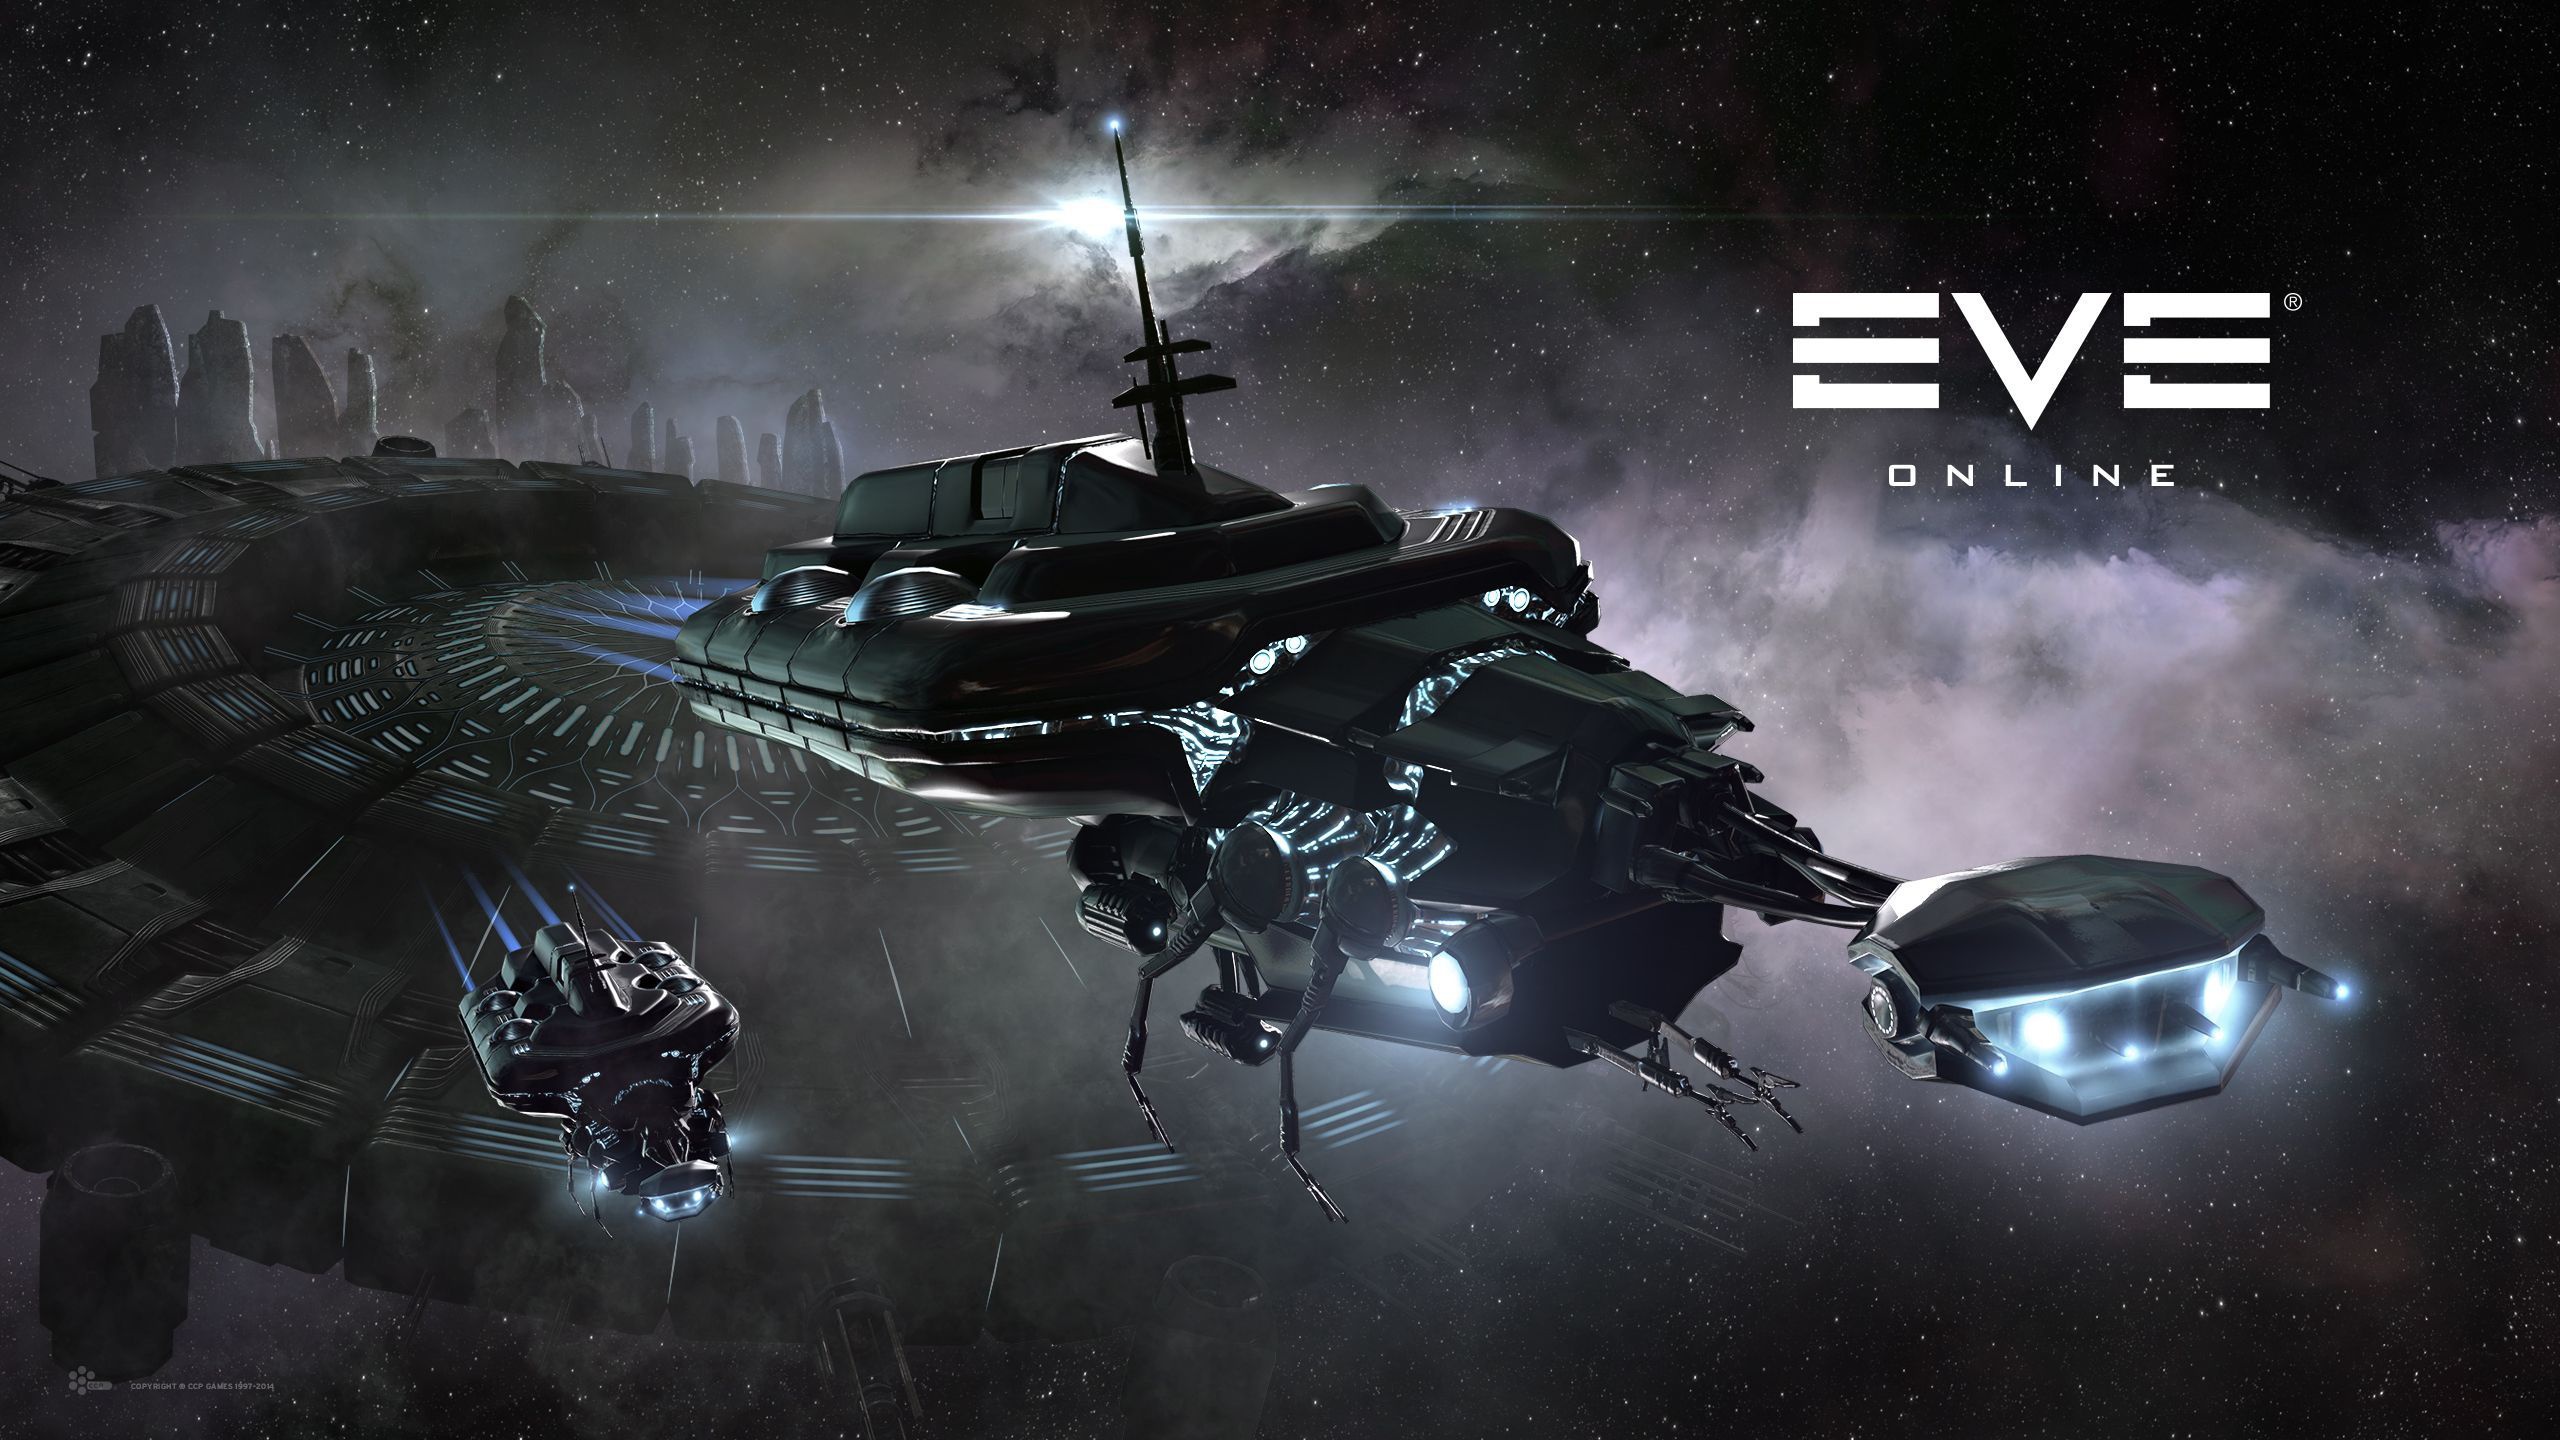 Eve Online Hd Wallpaper Background Image 2560x1440 Id Images, Photos, Reviews